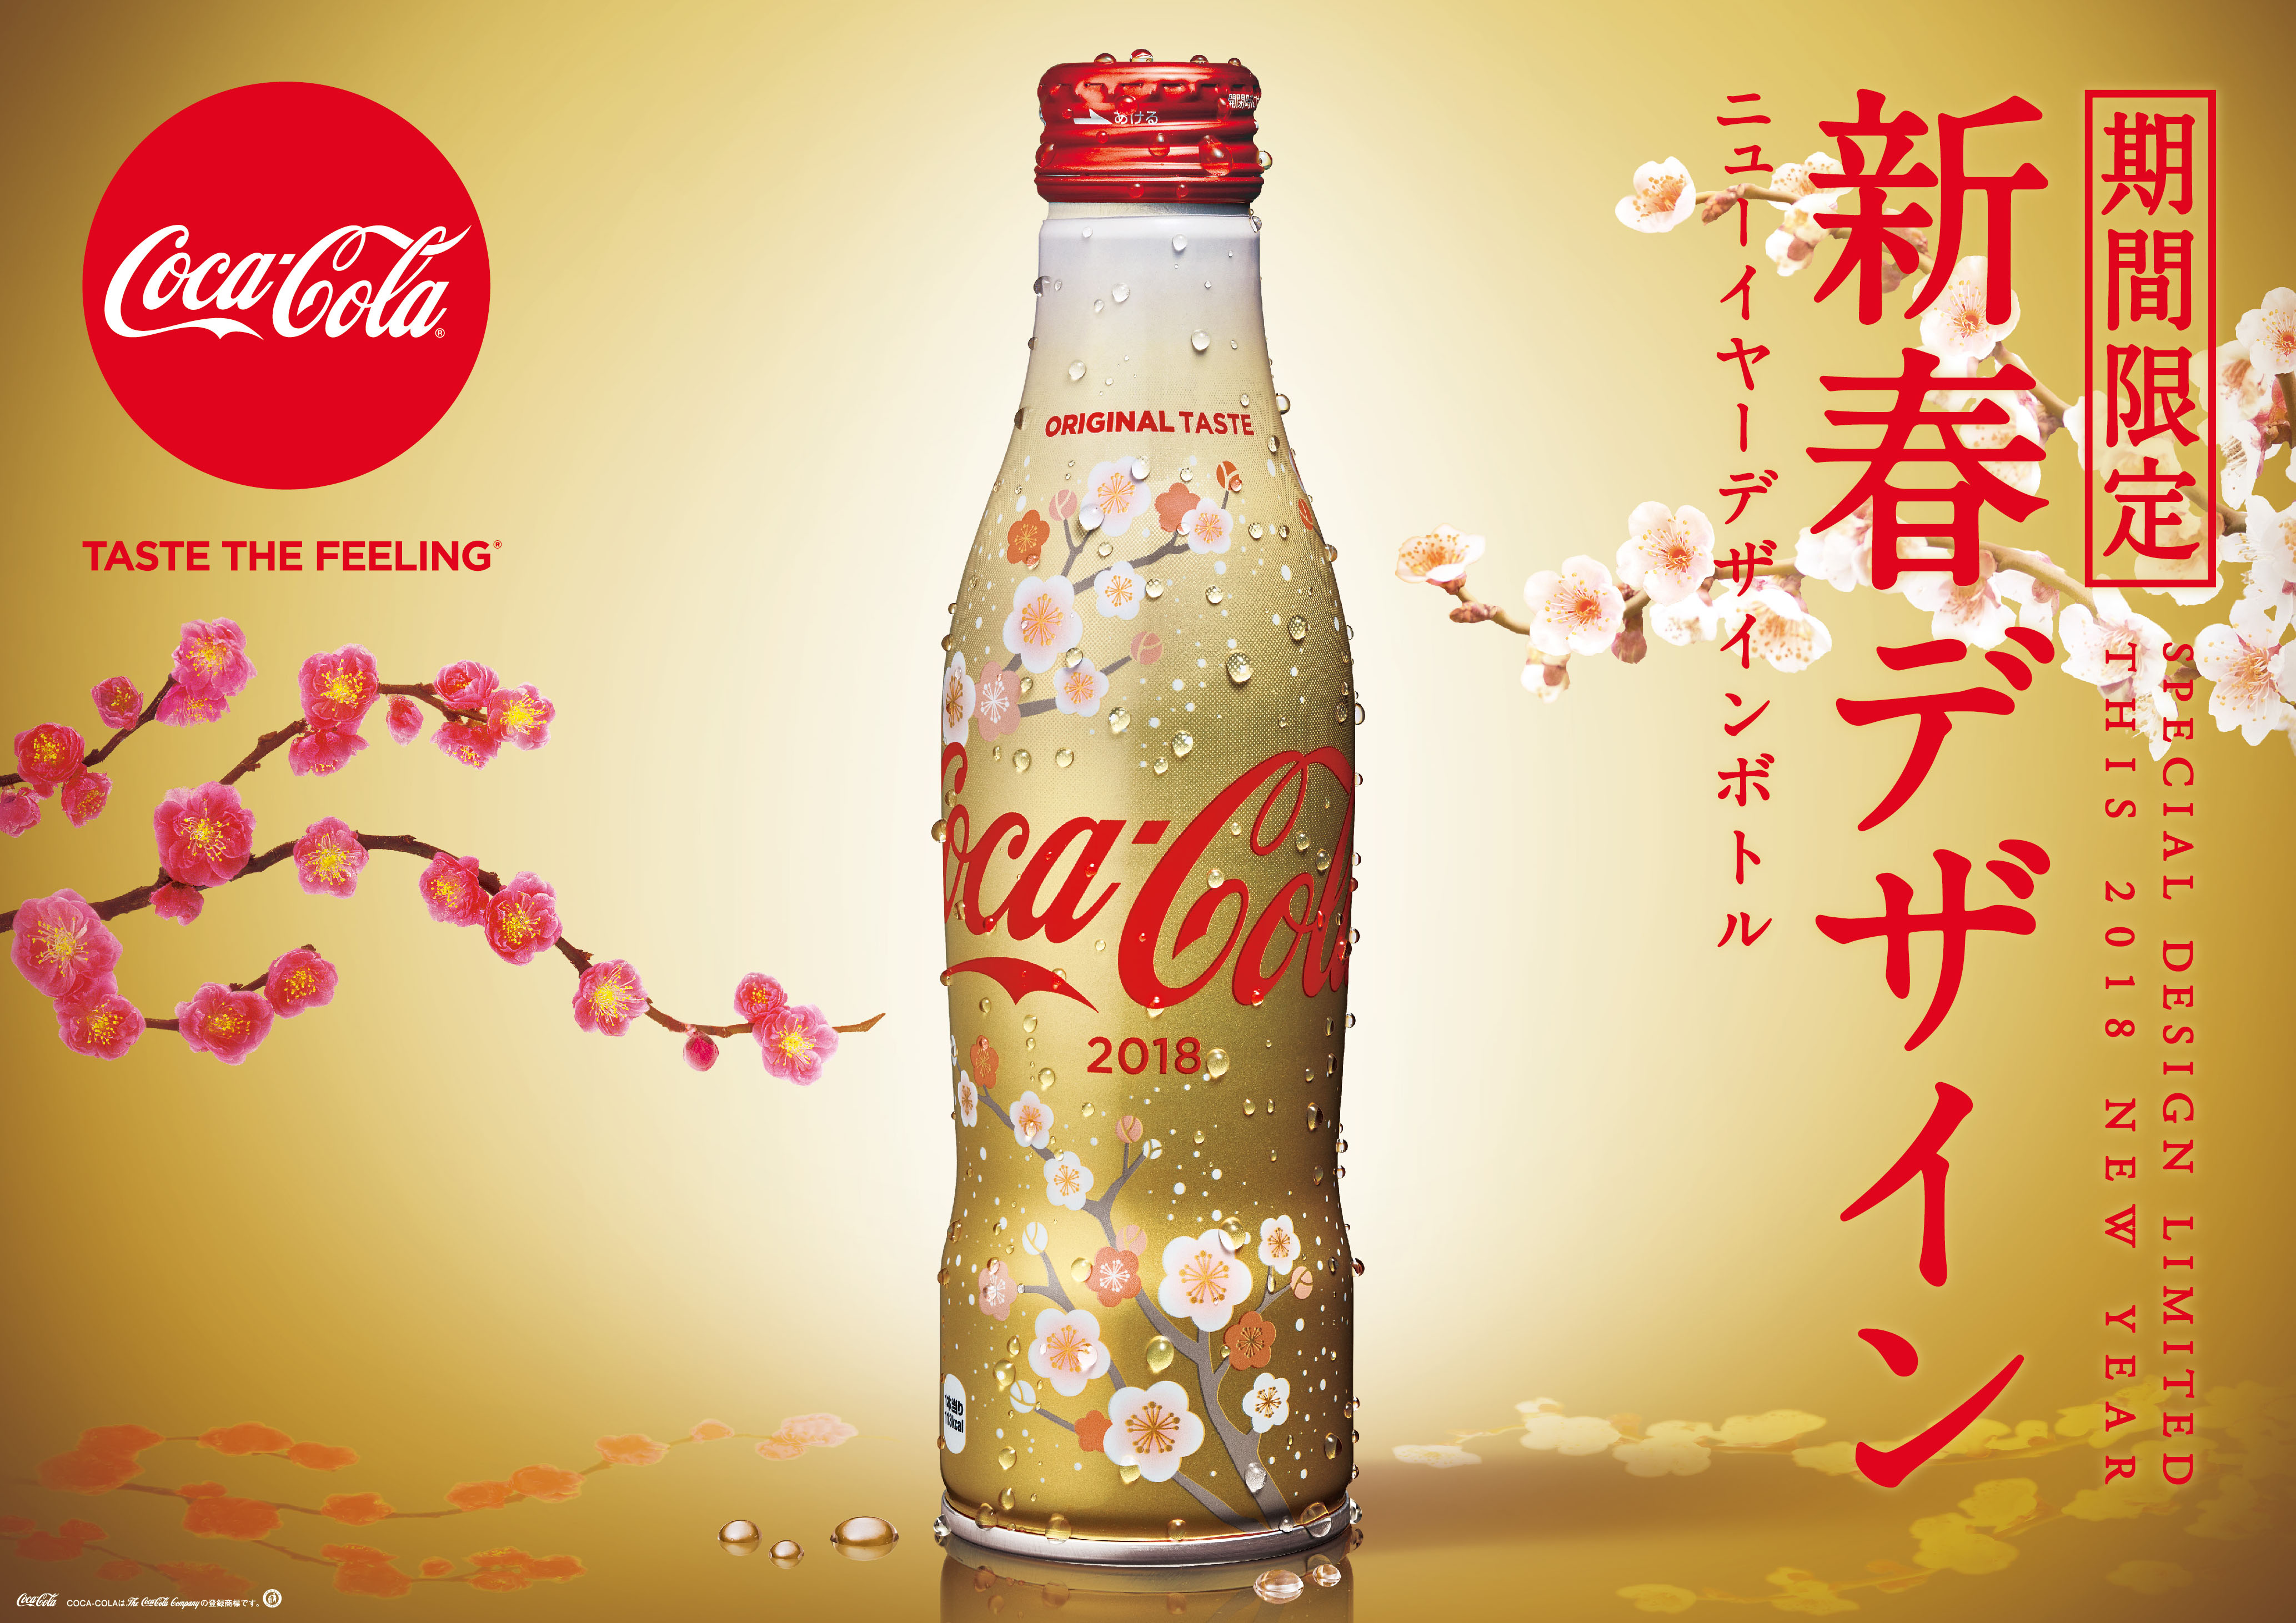 CocaCola adds new limitededition design to their seasonal bottle